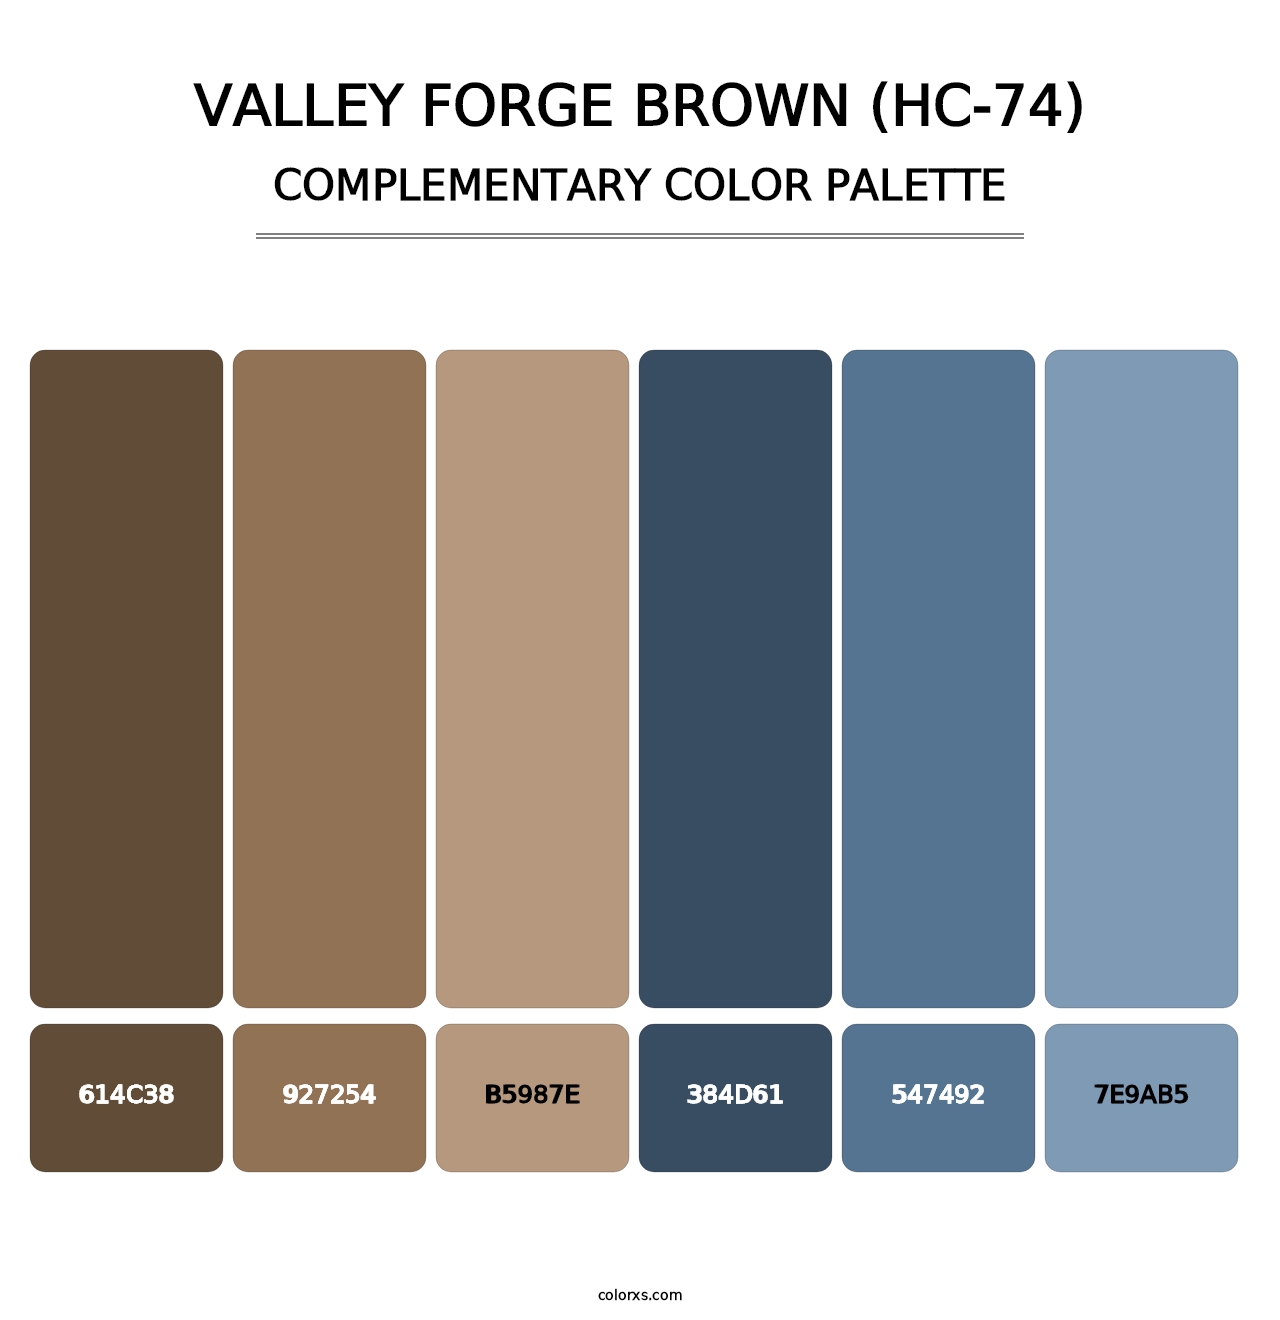 Valley Forge Brown (HC-74) - Complementary Color Palette